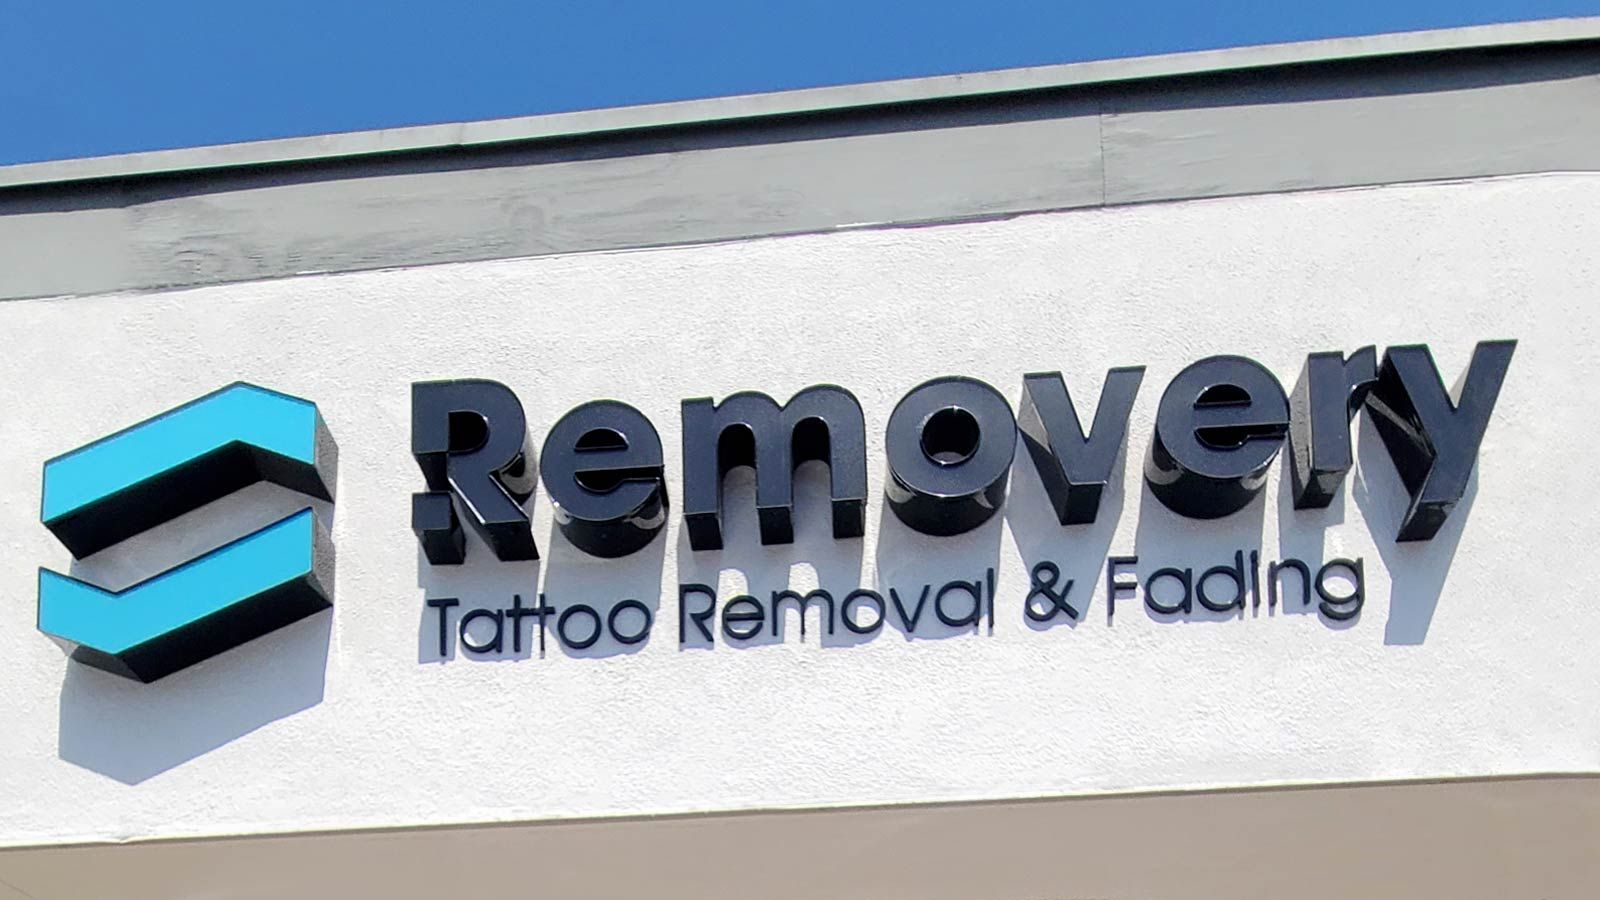 Removery Tattoo Removal & Fading outdoor branding sign